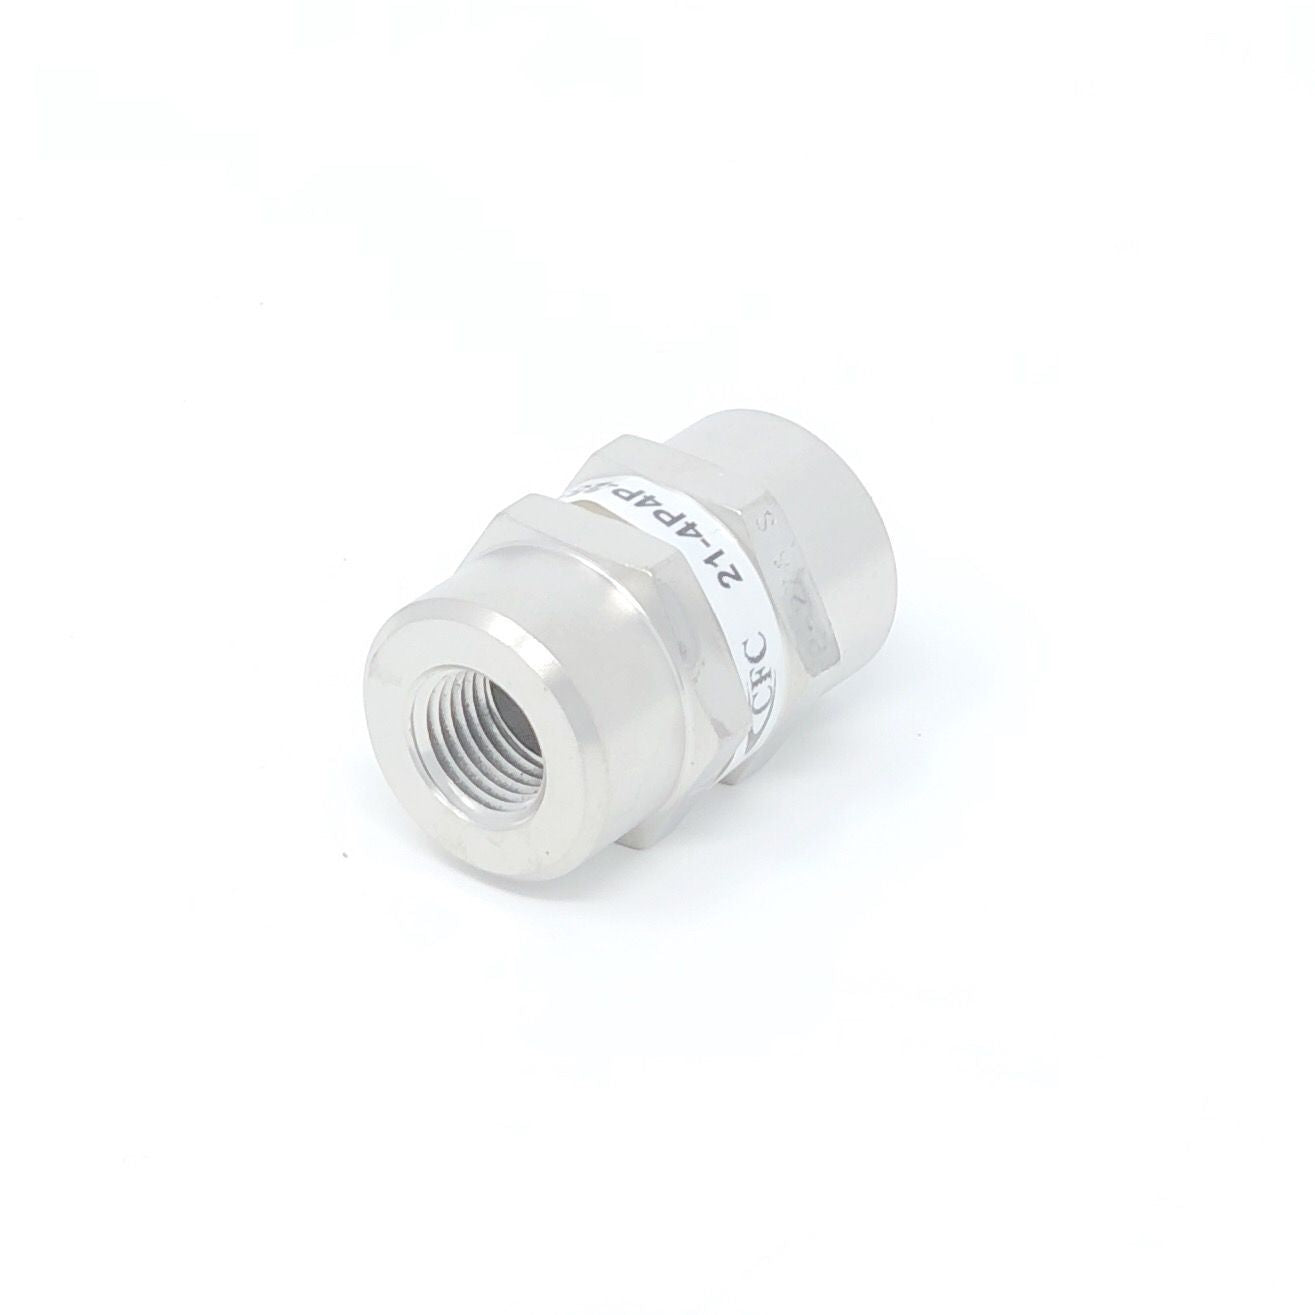 21-12S12S-18S : Chase High Pressure Inline Filter, 3000psi, #12 SAE (3/4"), 18 Micron, No Visual Indicator, With Bypass